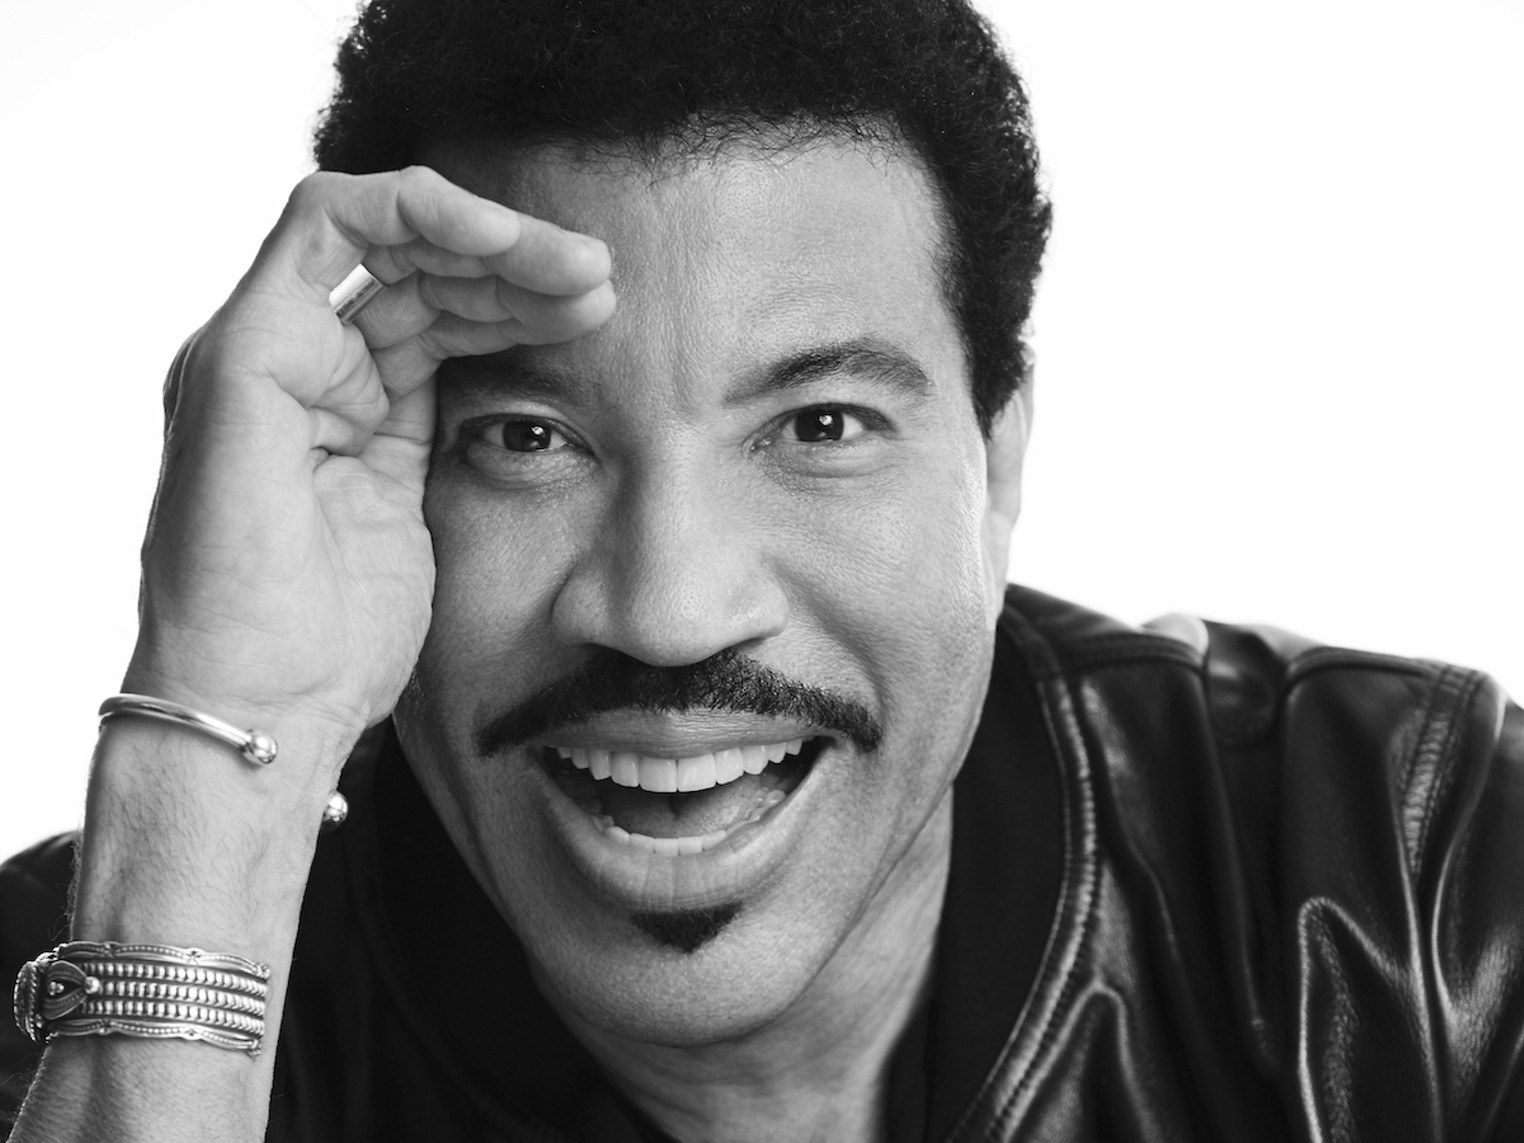 Lionel Richie deserves to be inducted into the Rock & Roll Hall of Fame